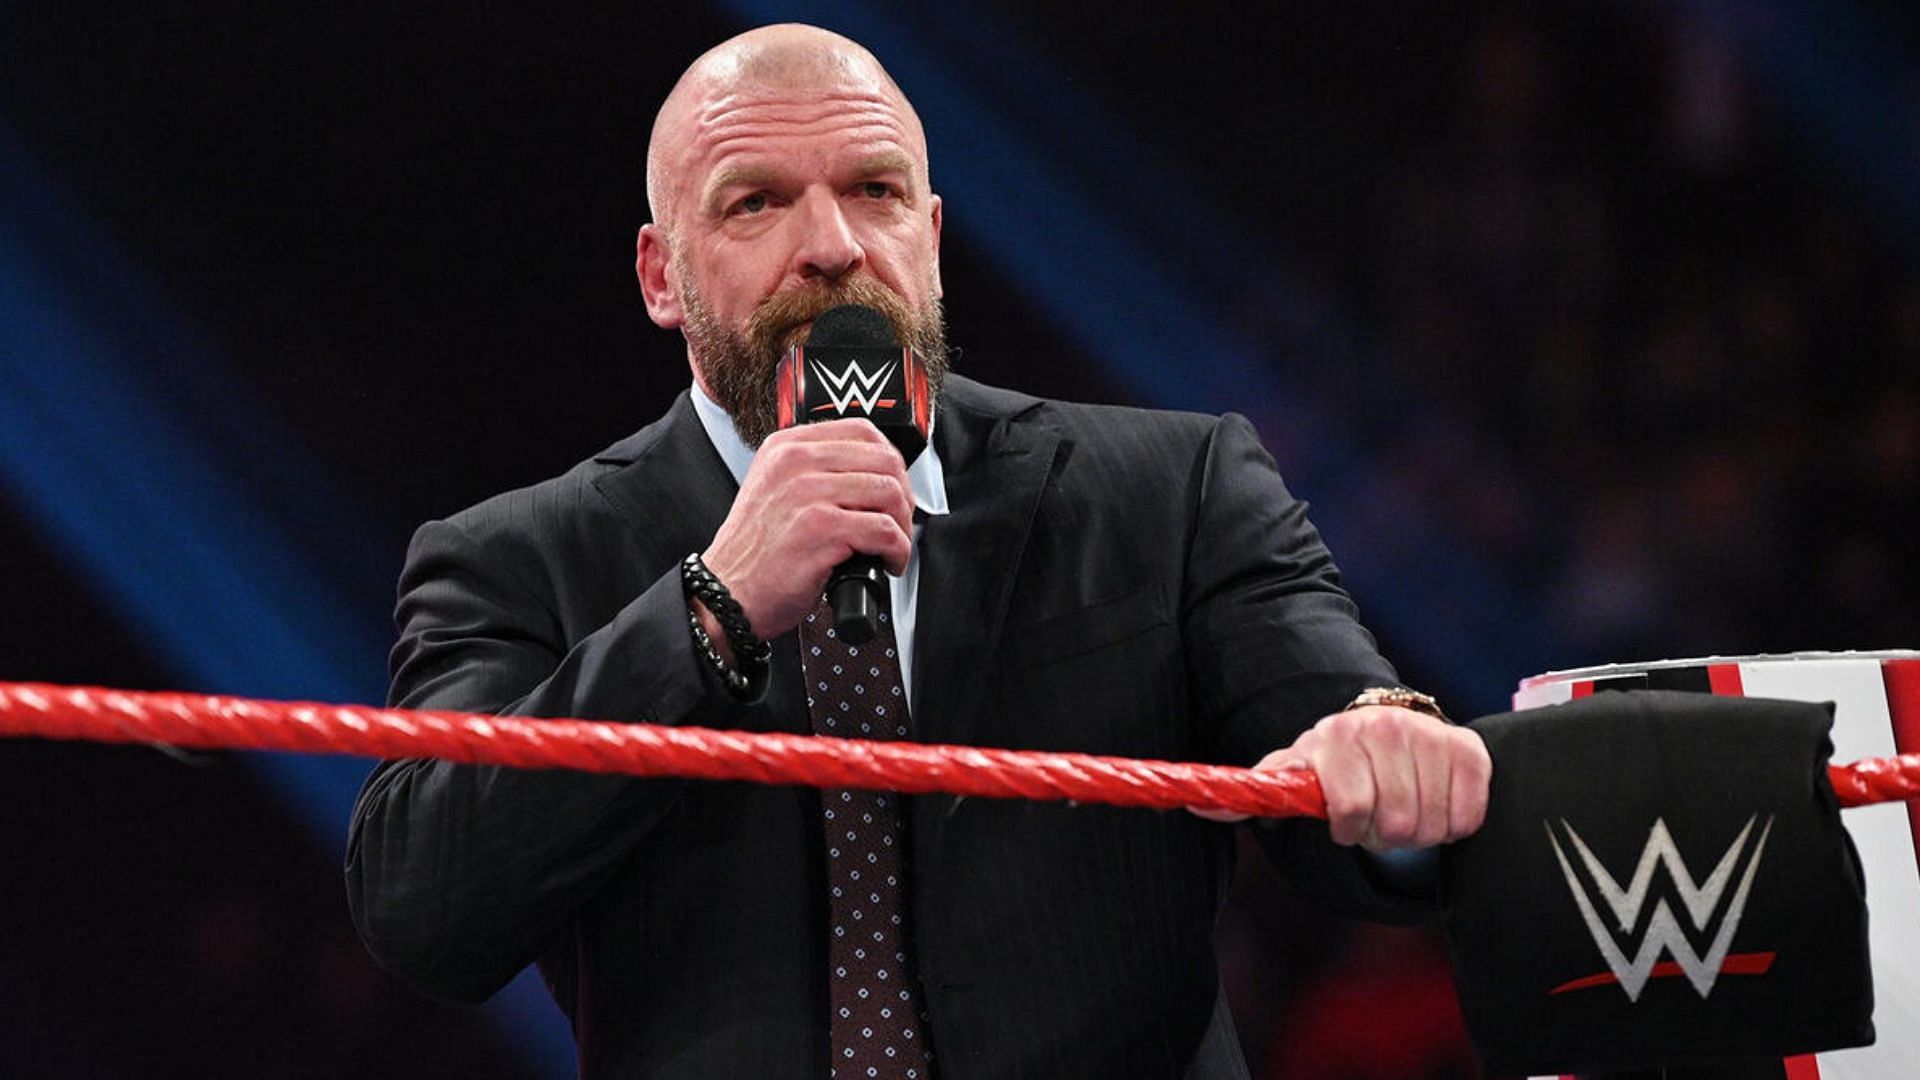 Triple H on Monday Night RAW in 2019!